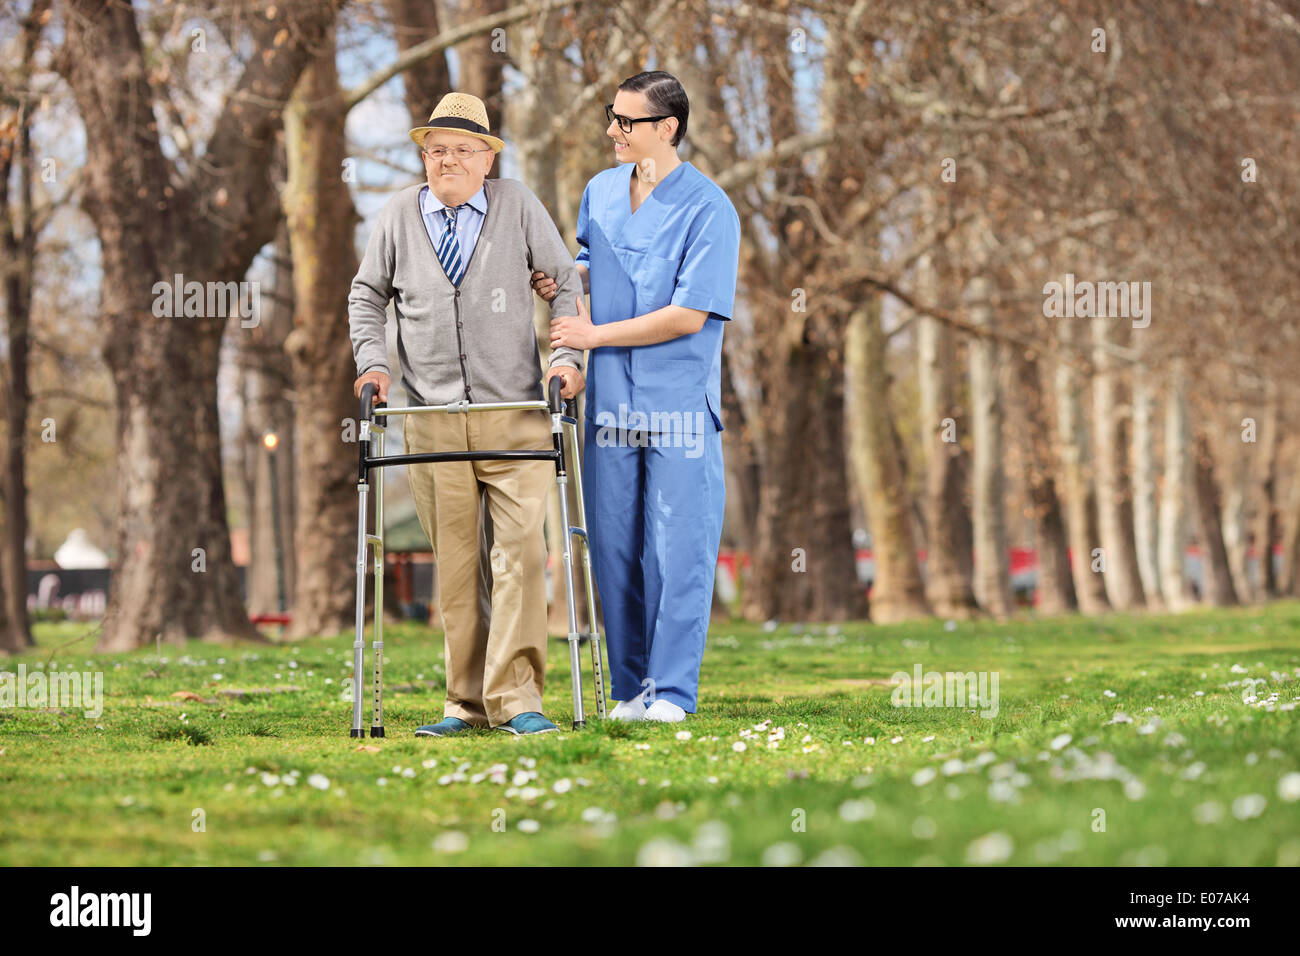 Medical professional helping a senior with walker in park Stock Photo